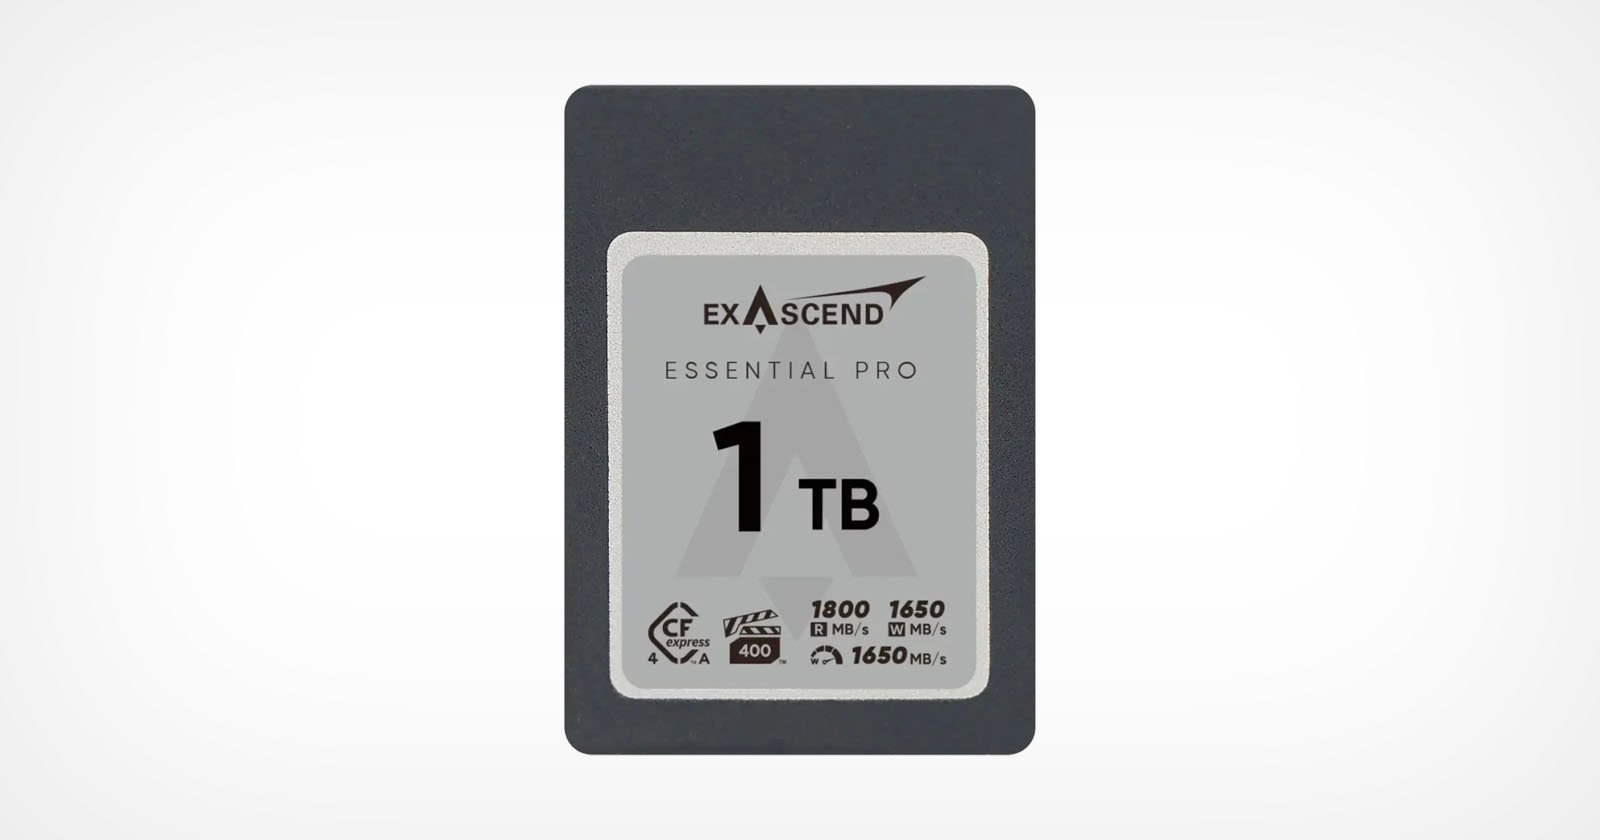  exascend memory cards sony cameras can 